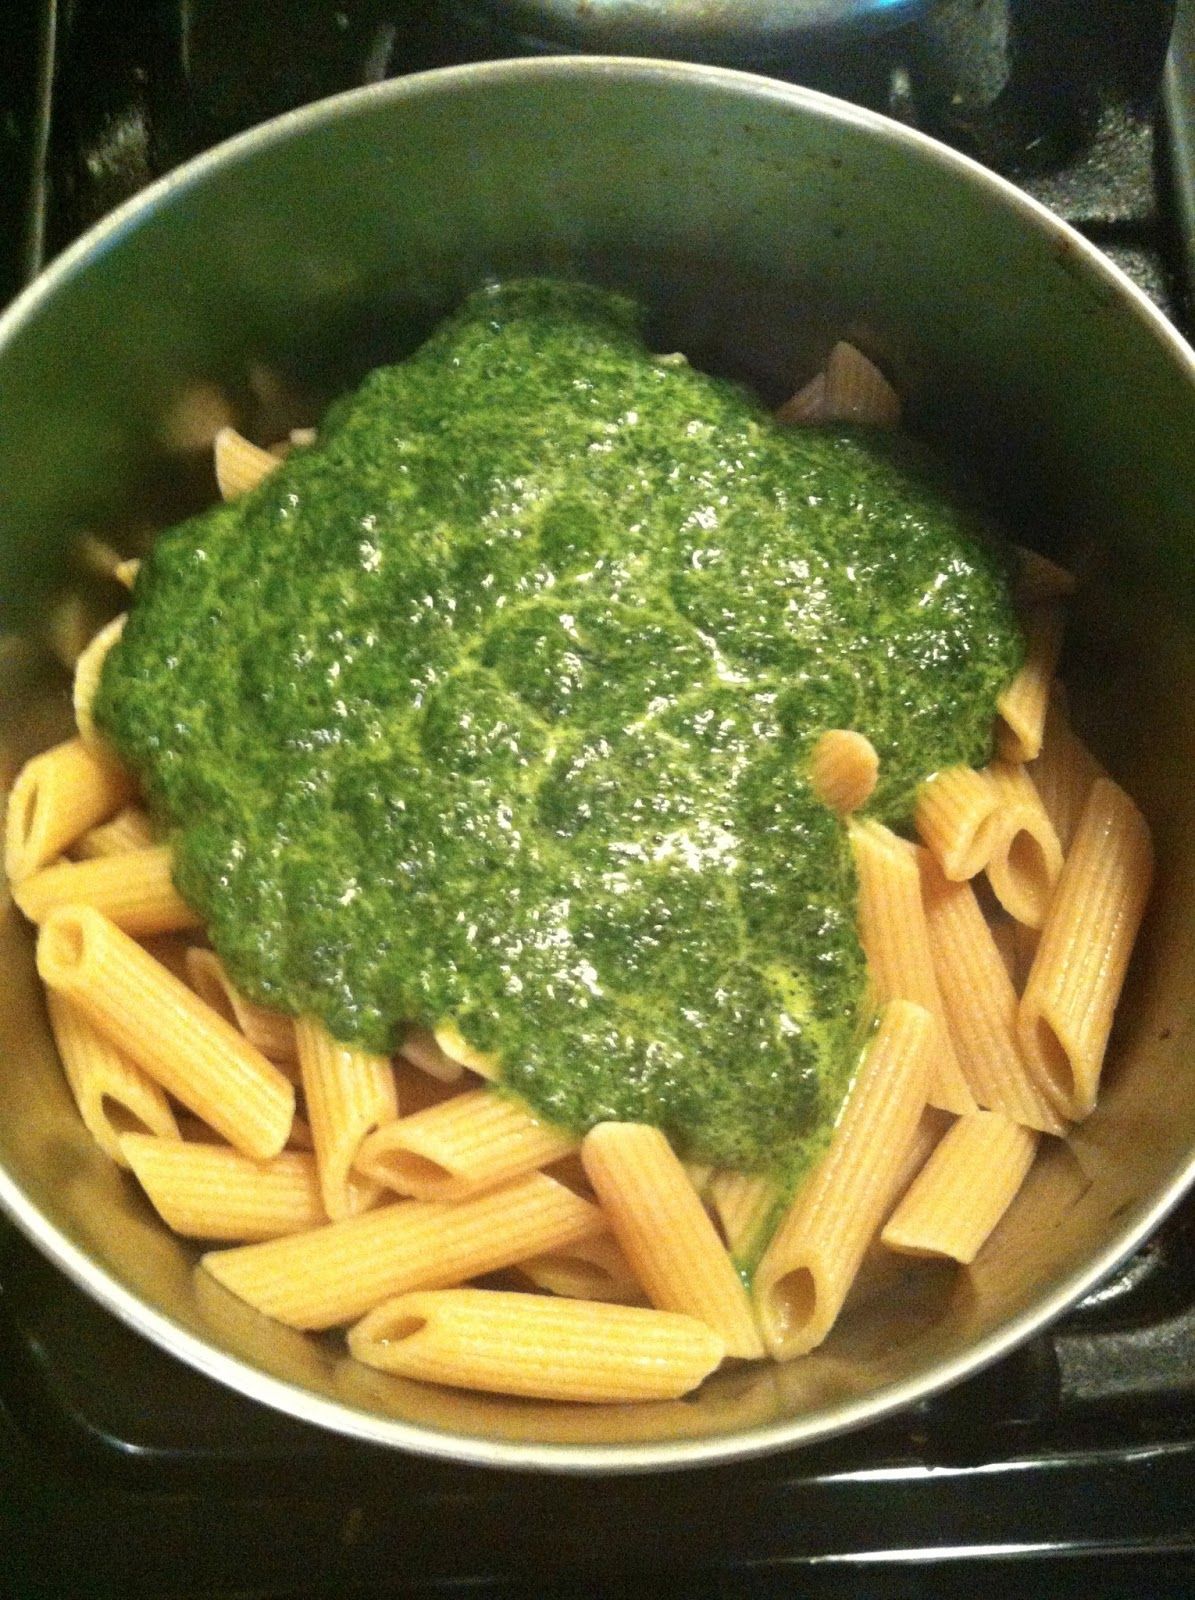 taylor made: clean-eating: whole wheat penne with healthy spinach pesto